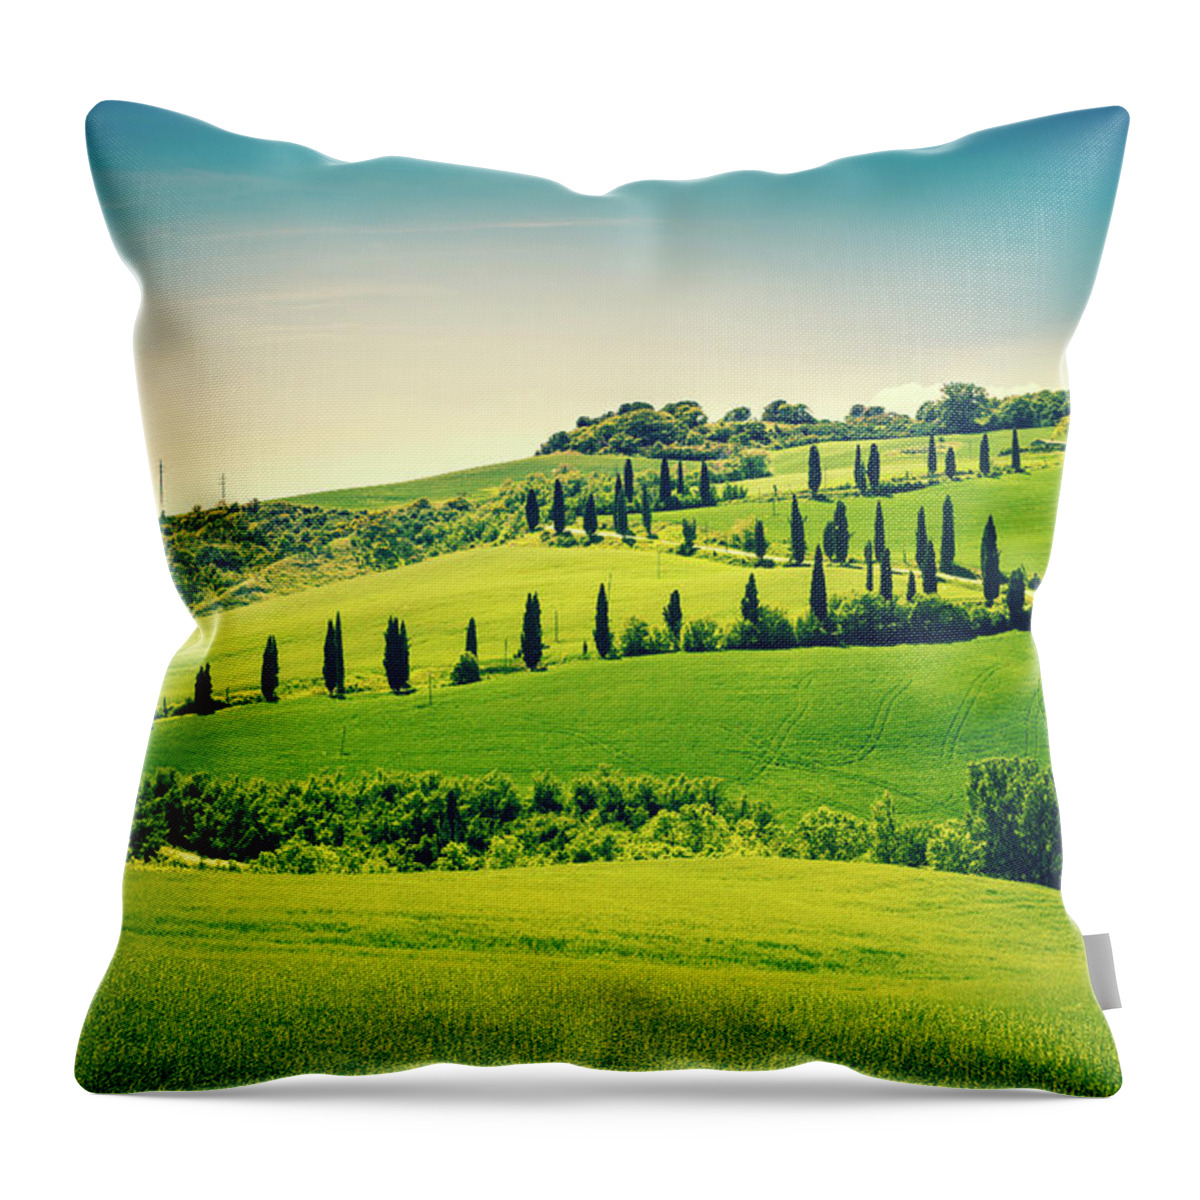 Scenics Throw Pillow featuring the photograph Country Road In Tuscany With Cypress by Zodebala